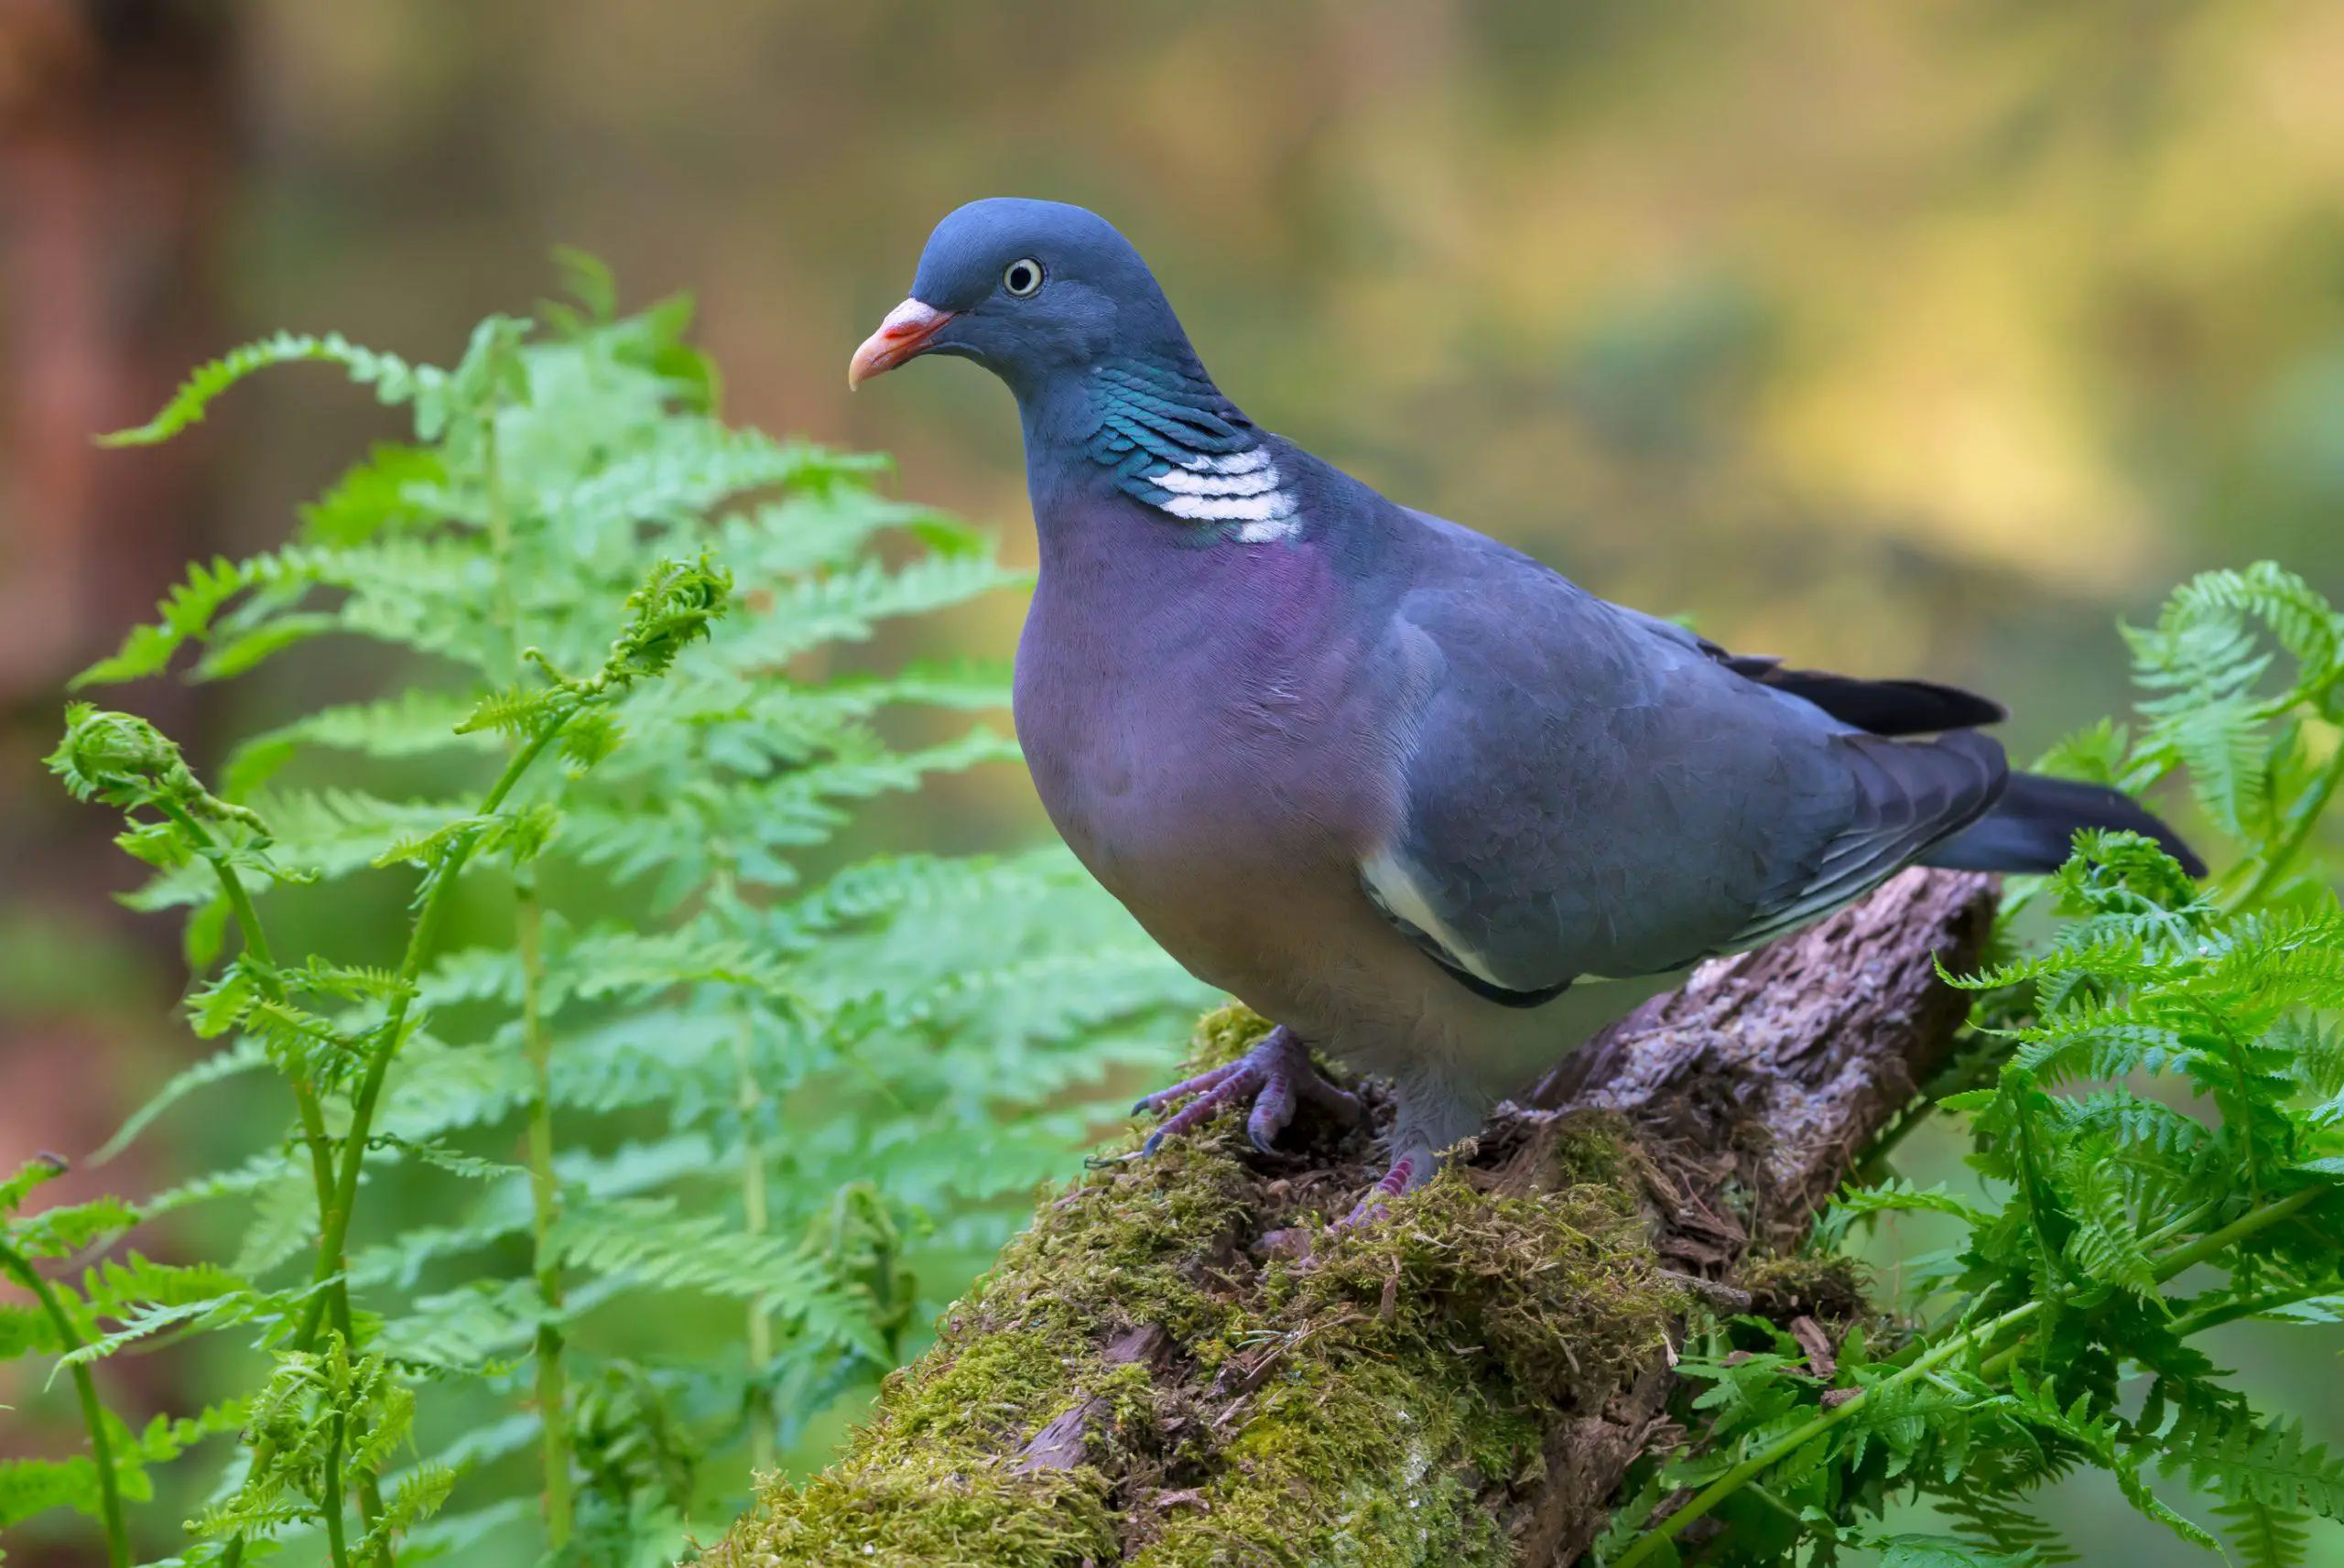 Common wood pigeon posing on old trunk with moss and ferns all around him